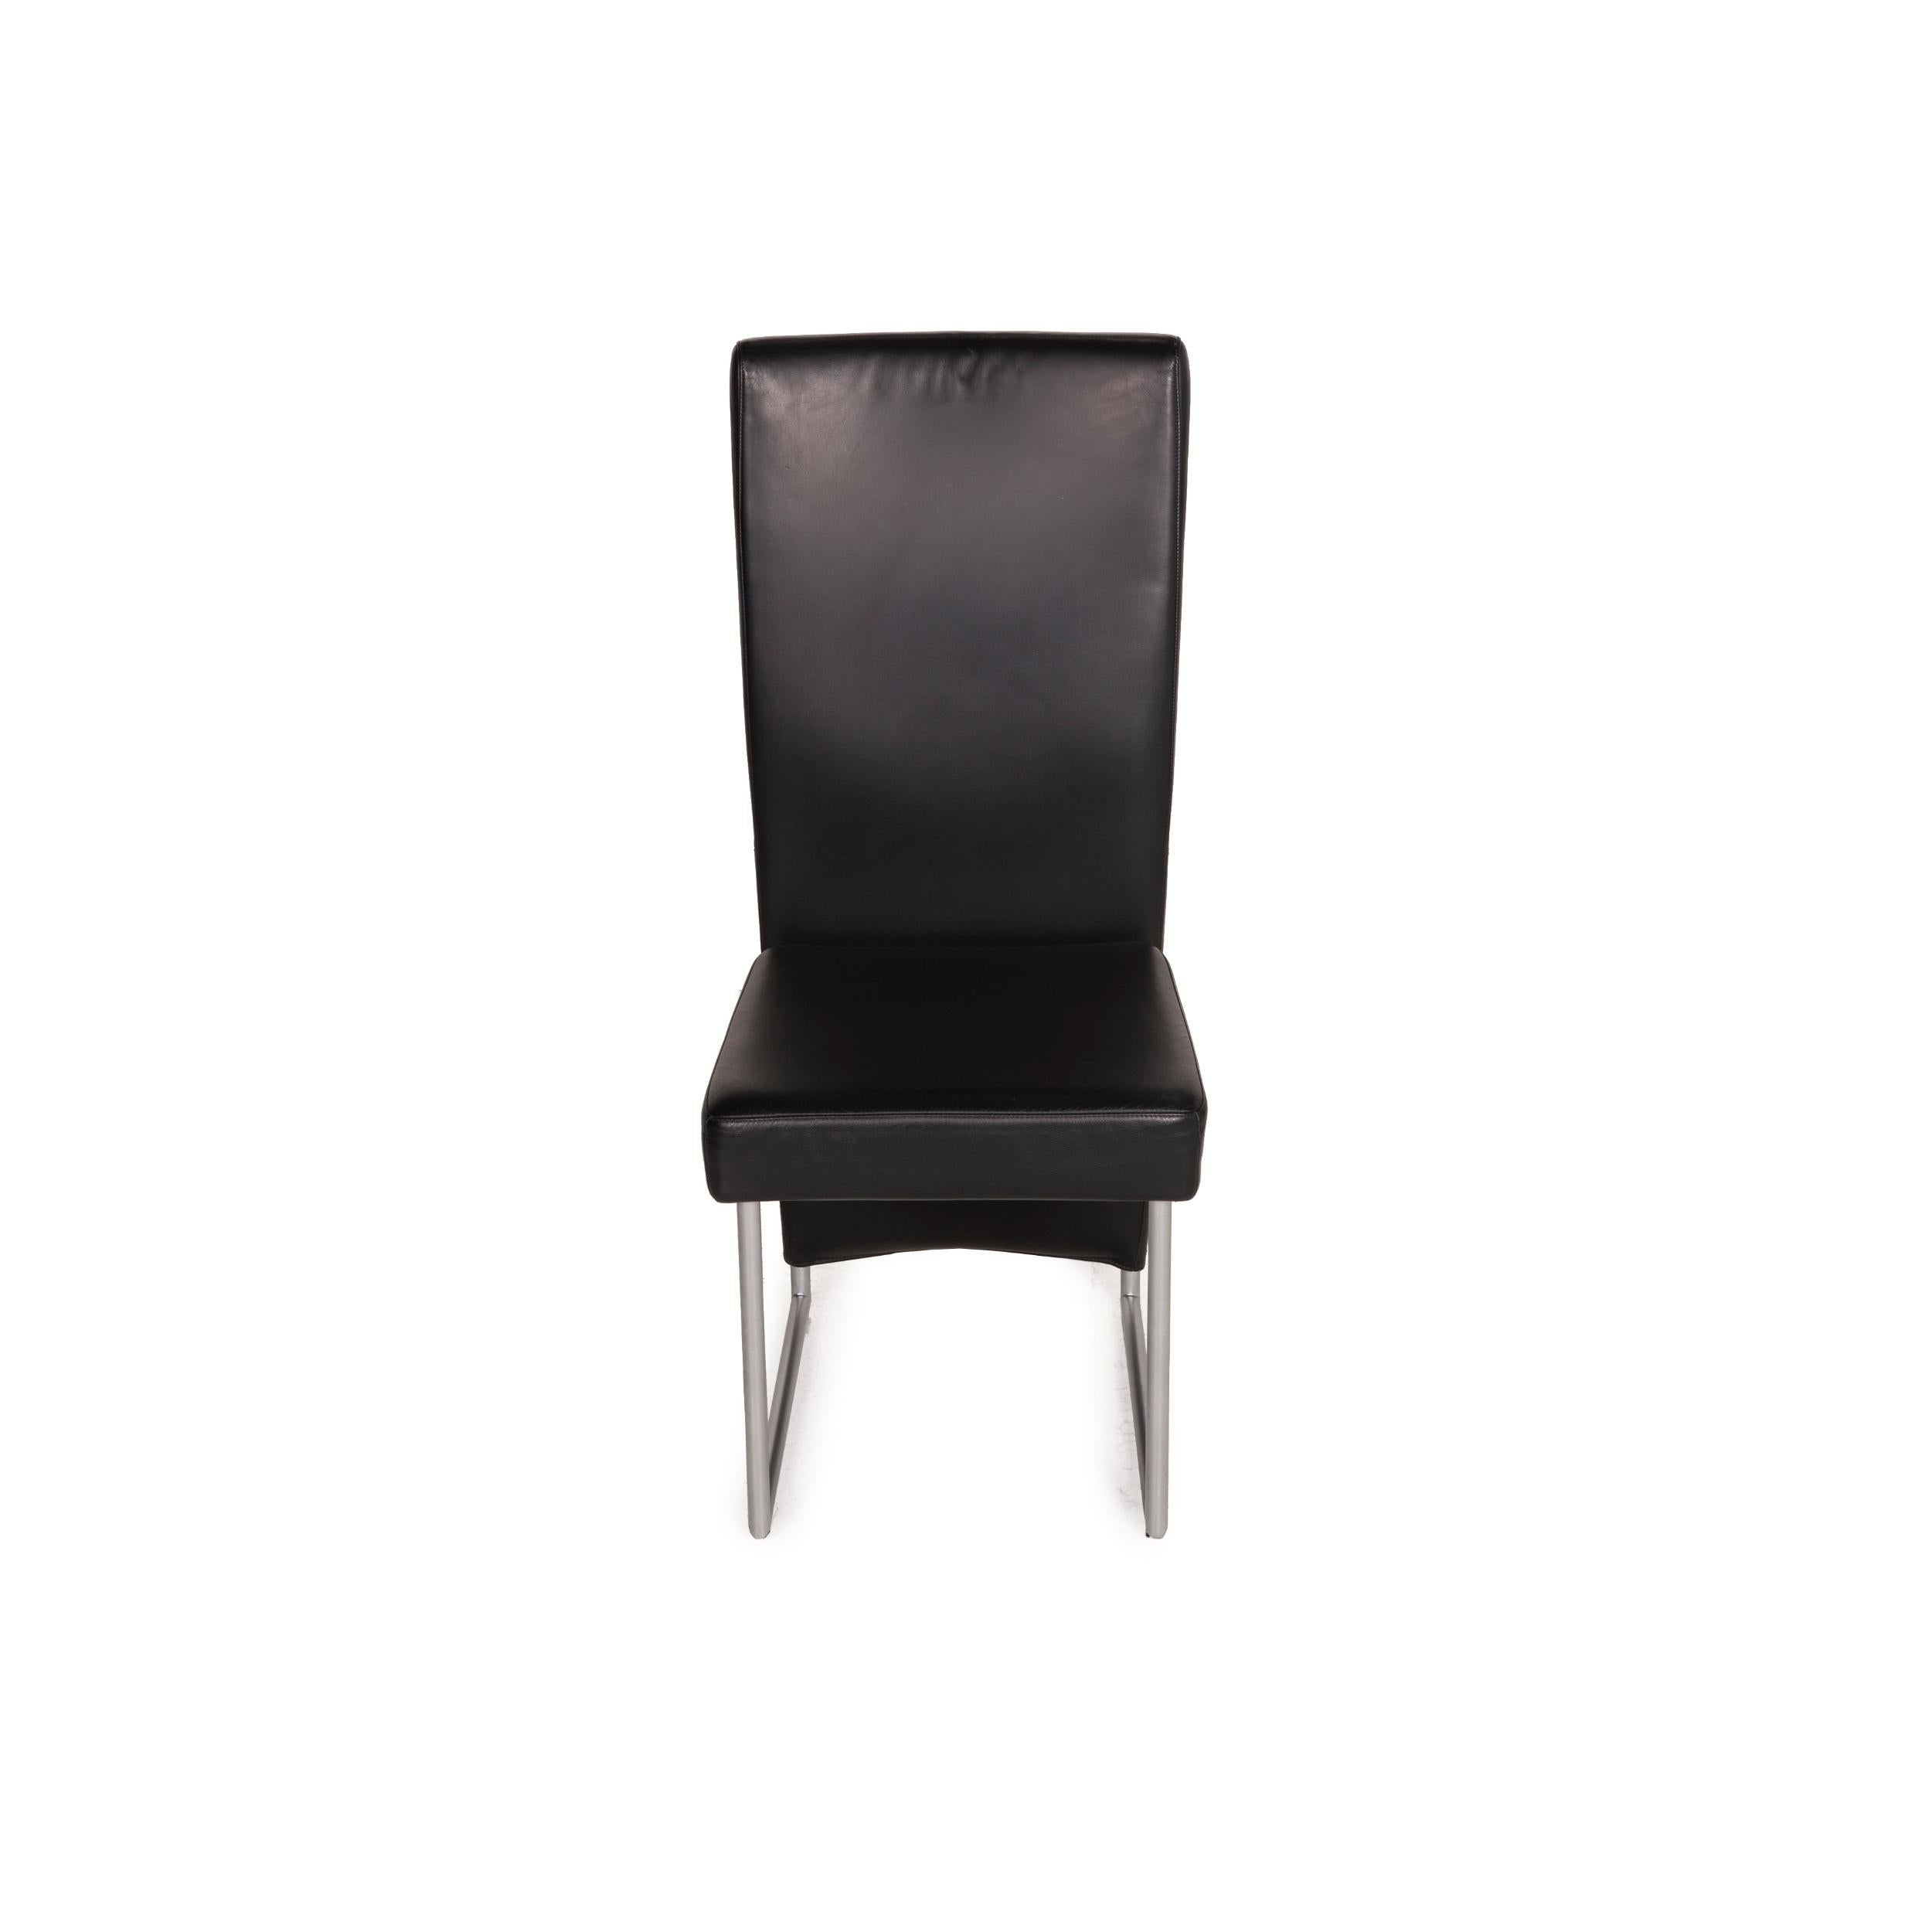 Rolf Benz Black Leather Chair For Sale 2